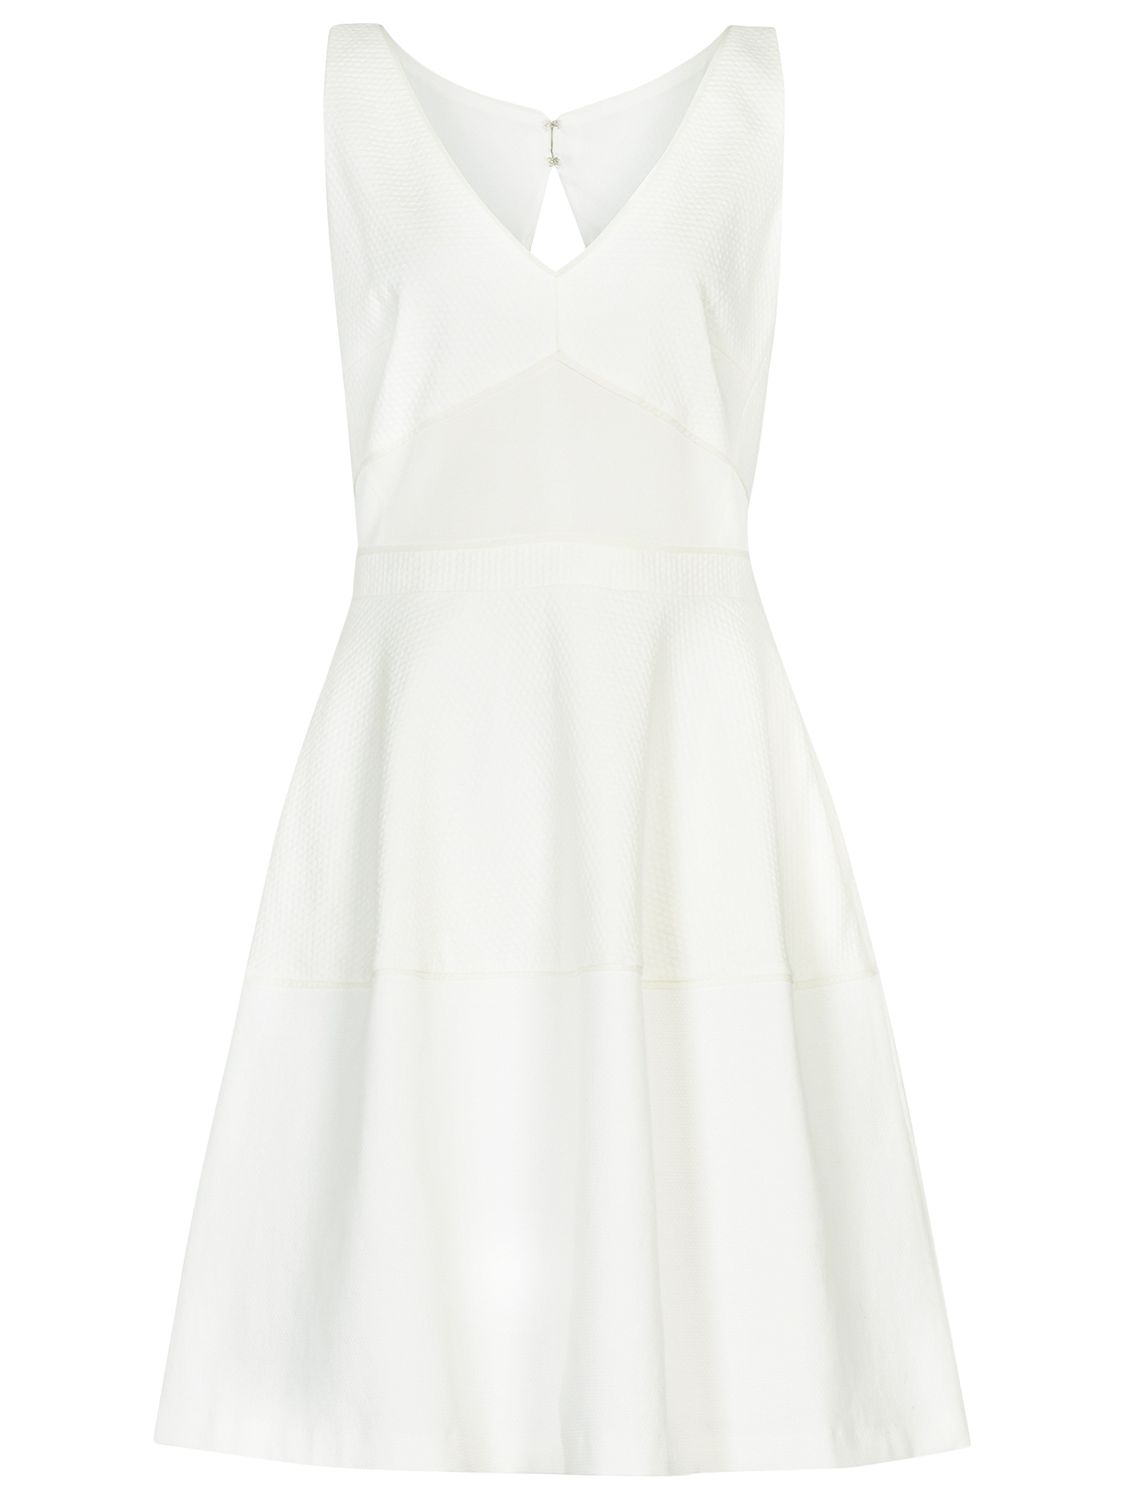 Reiss Natalia Fit and Flare Dress, Cream at John Lewis & Partners